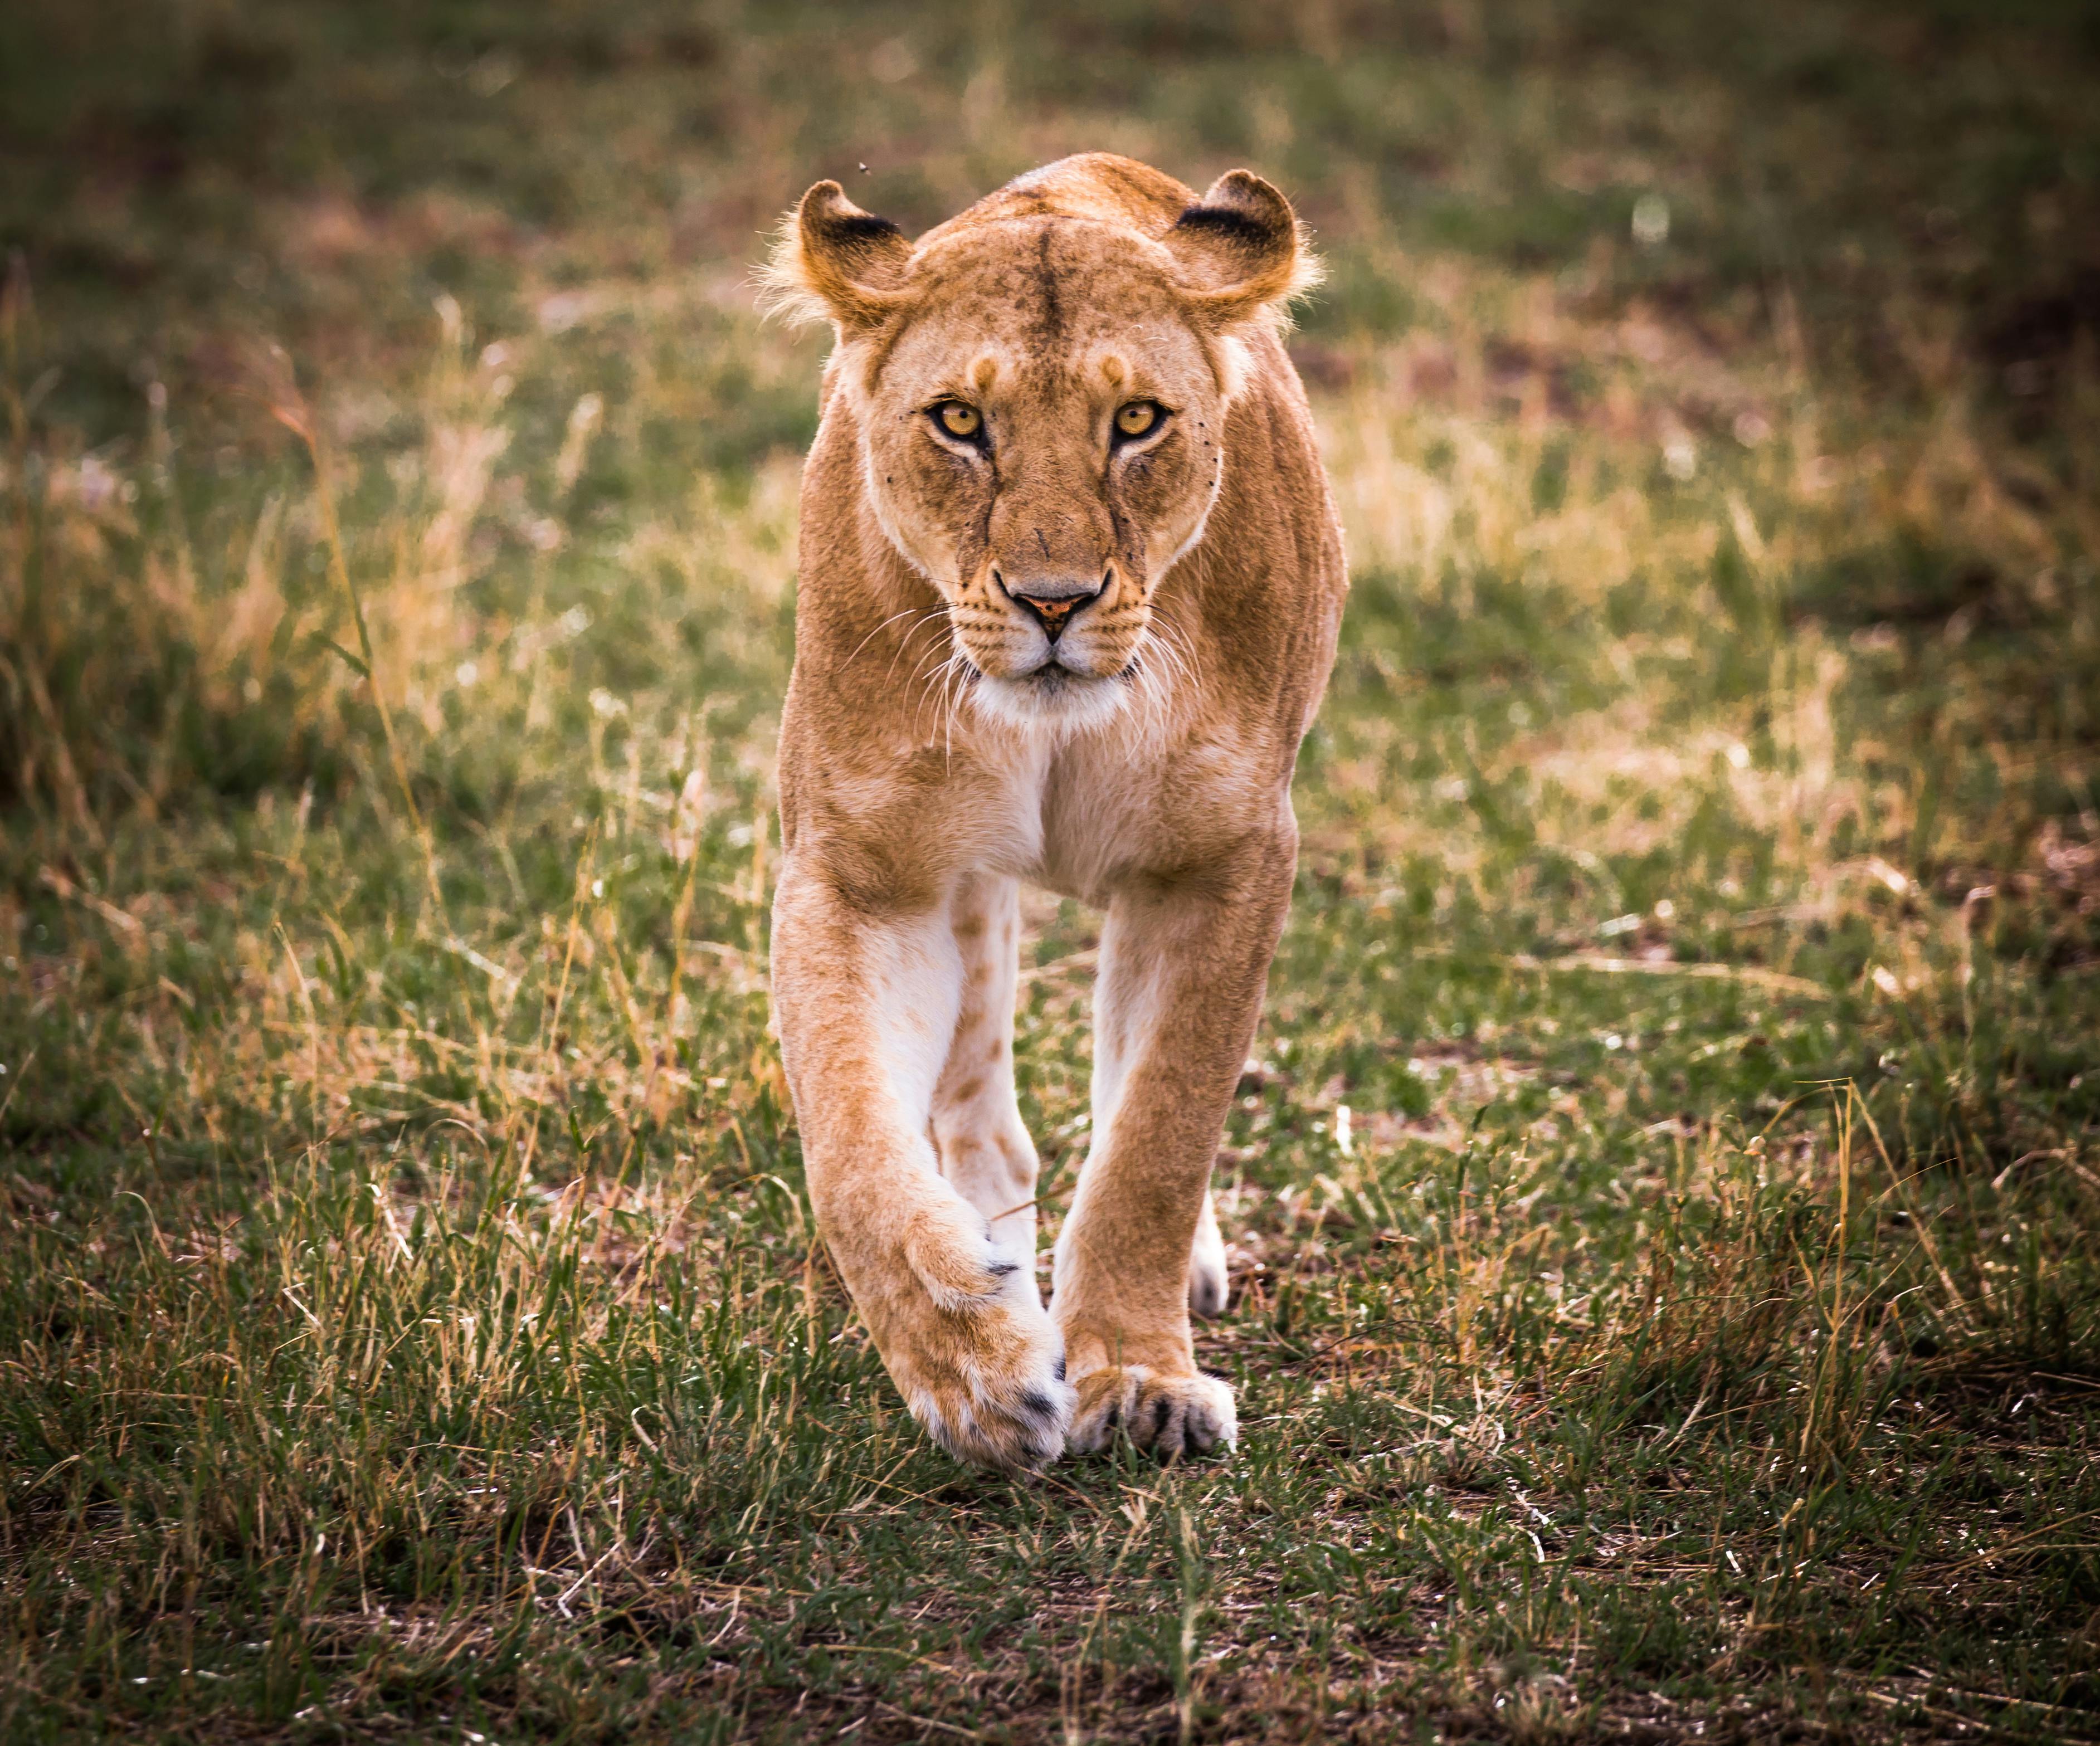 Launching a bold campaign to foster pride for lions across Tanzania